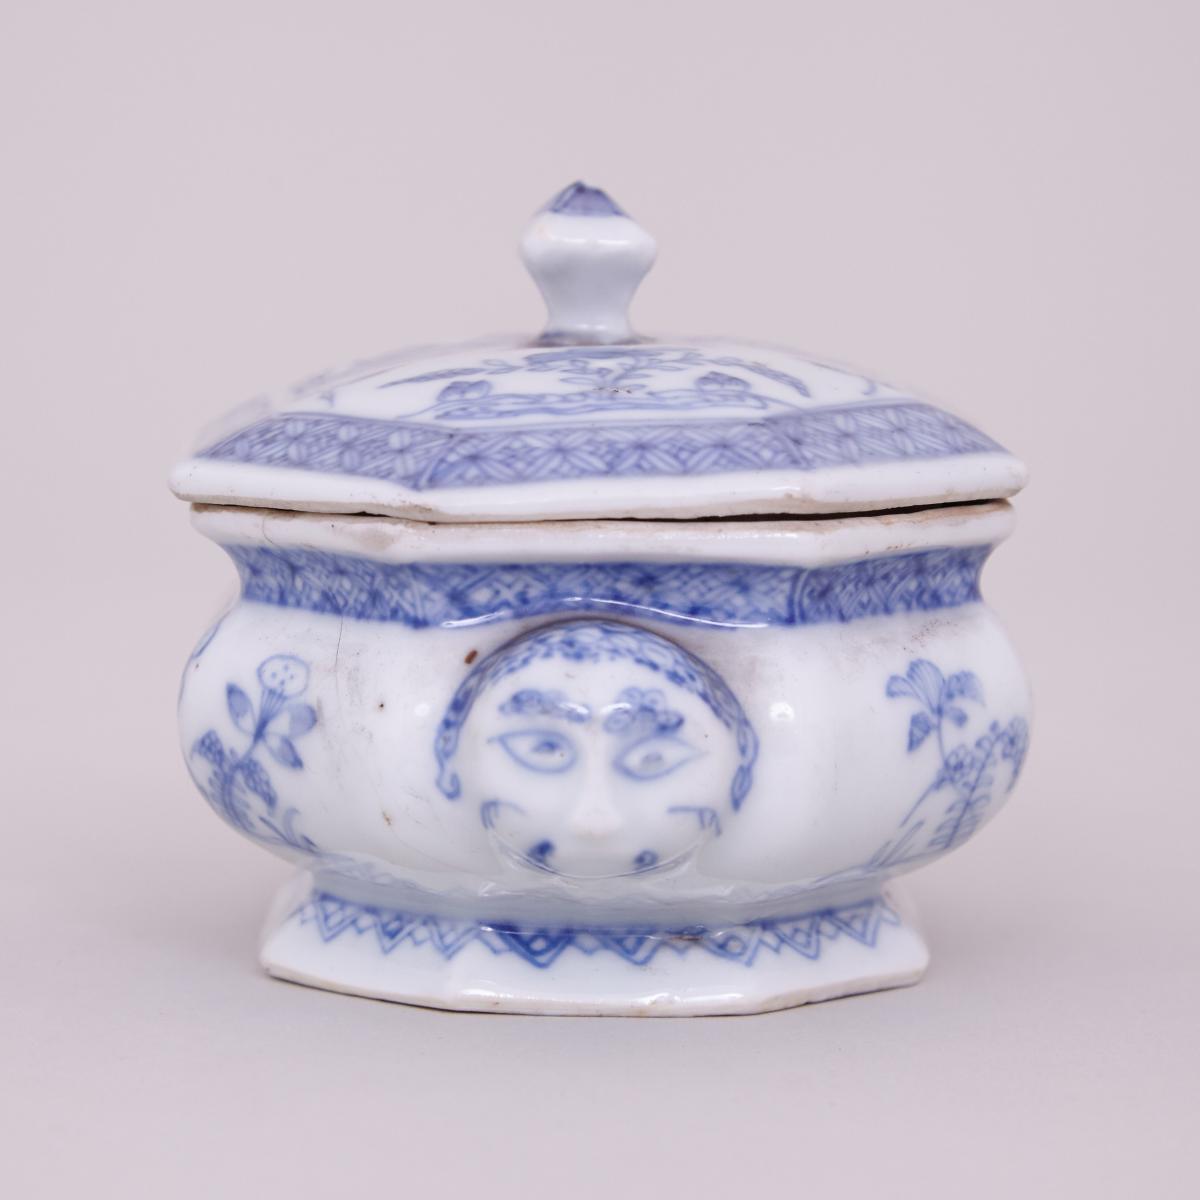 Unusual Chinese Blue and White Spice Box with Cover 